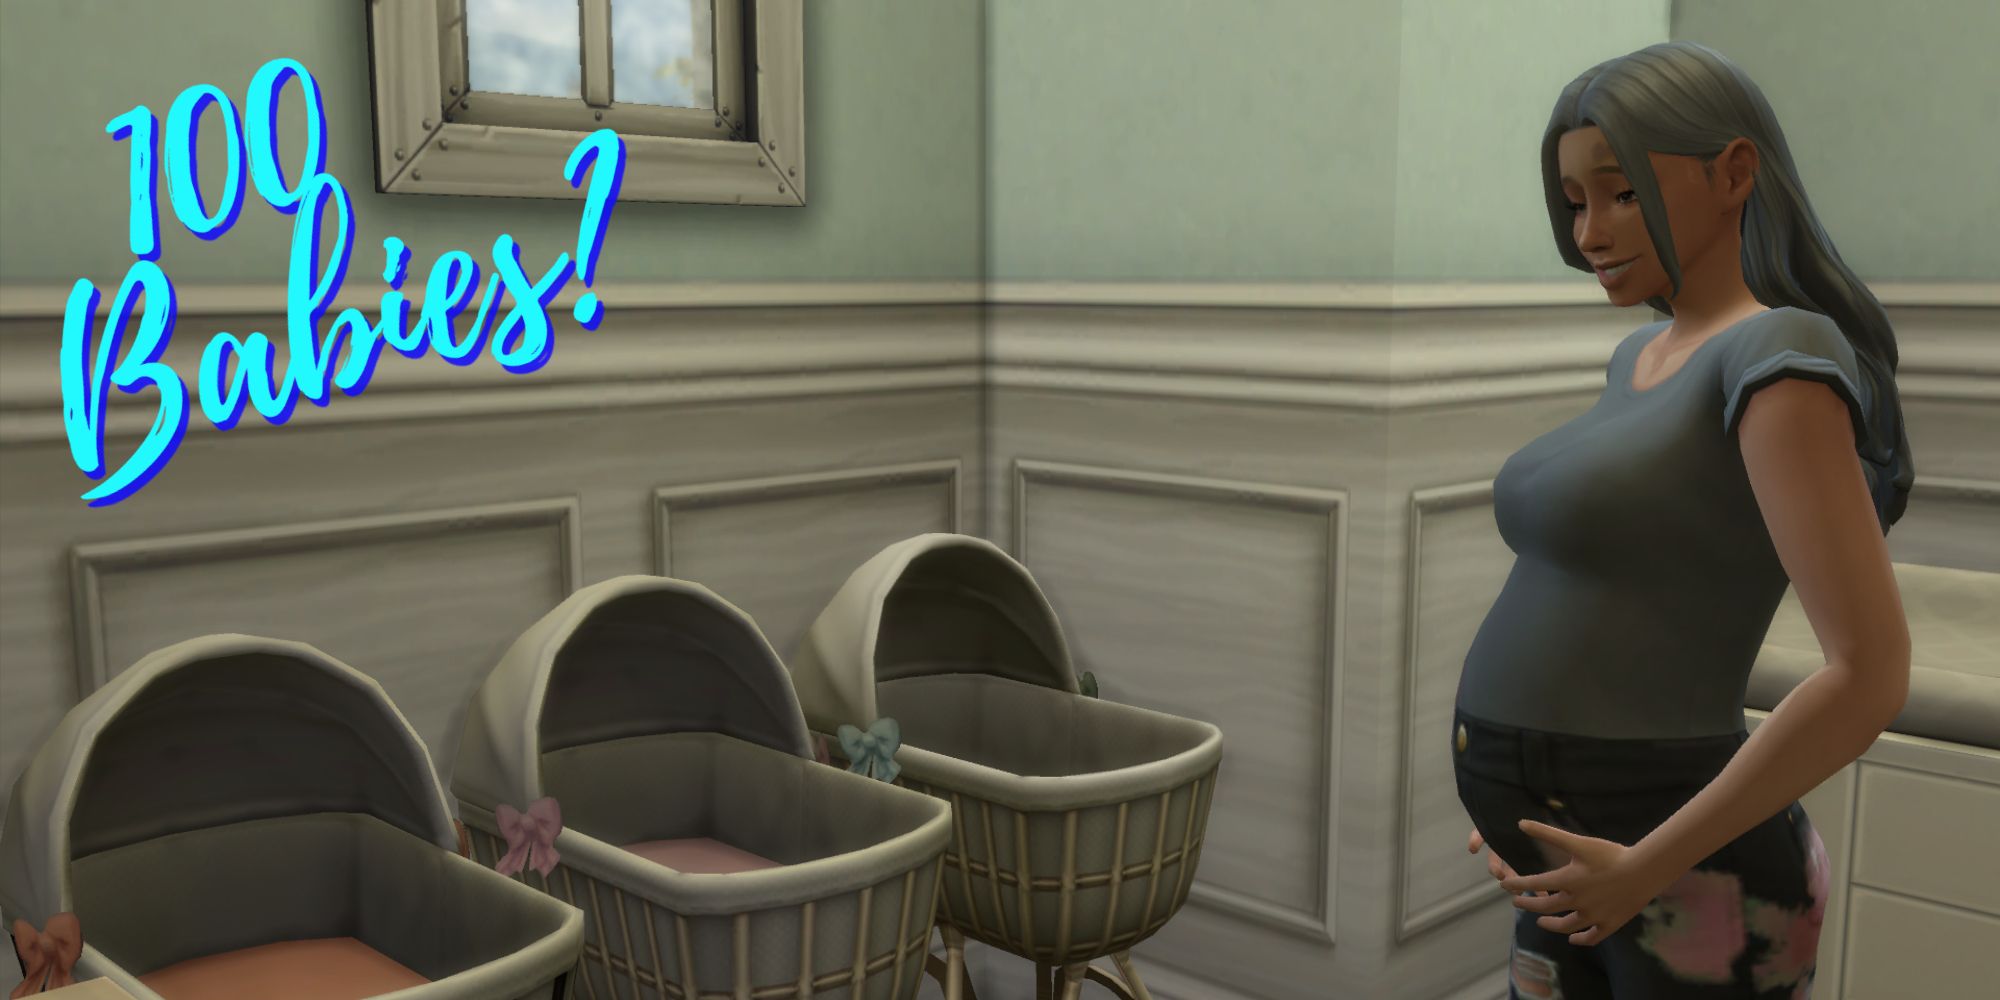 A Sim is pregnant in front of three bassinets for the 100 Baby Challenge, one of the most popular legacy challenges in The Sims franchise.